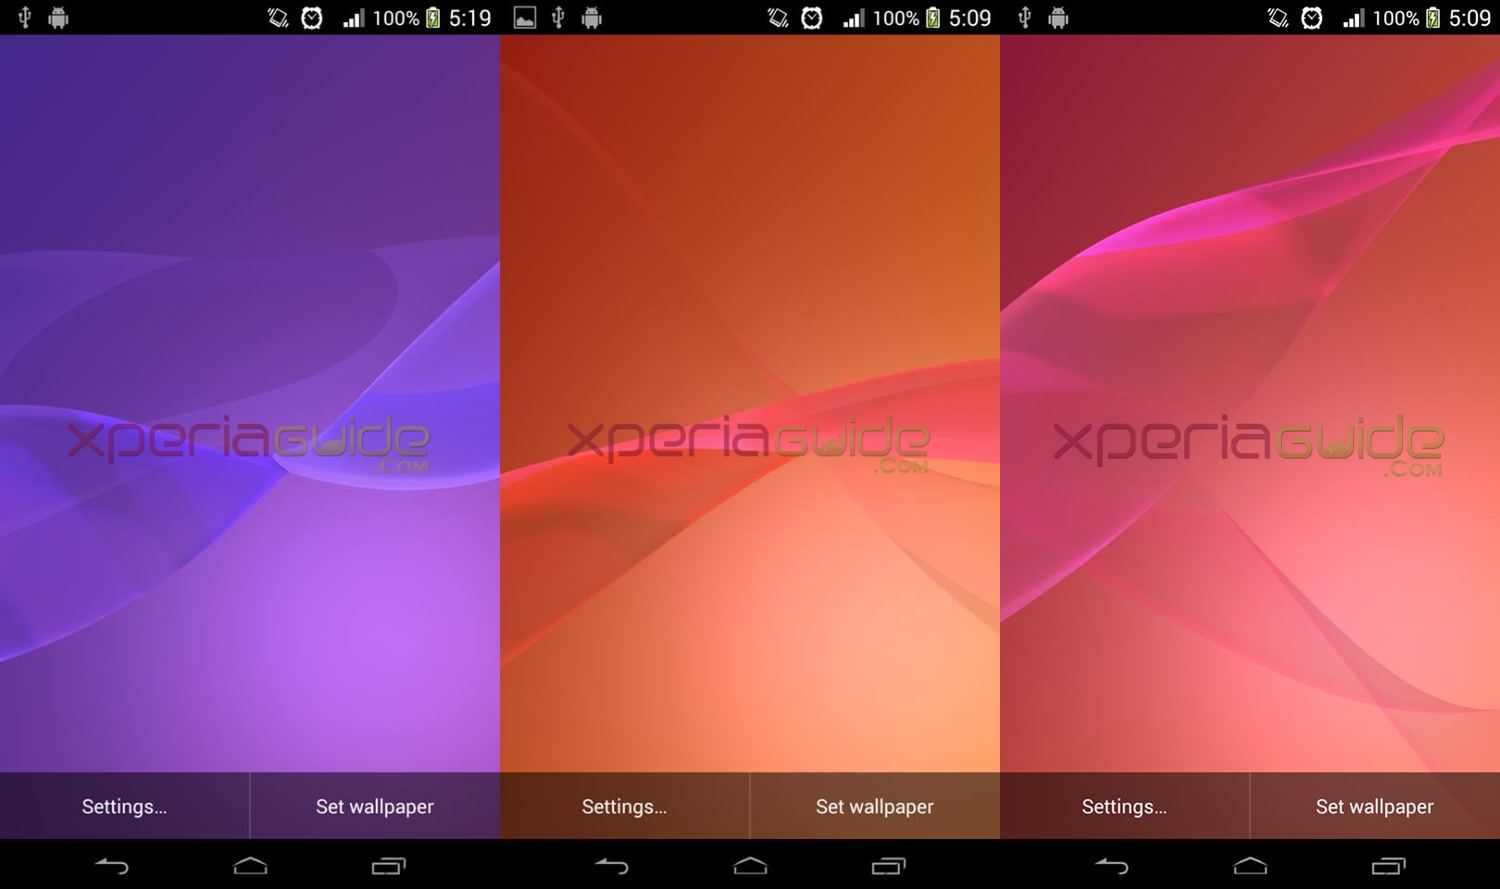 Free Download Sony Xperia Z2 Media Apps And Live Wallpapers Now Available Online 1500x8 For Your Desktop Mobile Tablet Explore 44 Xperia Z2 Wallpaper 1080p Smartphone Wallpaper Sony Xperia